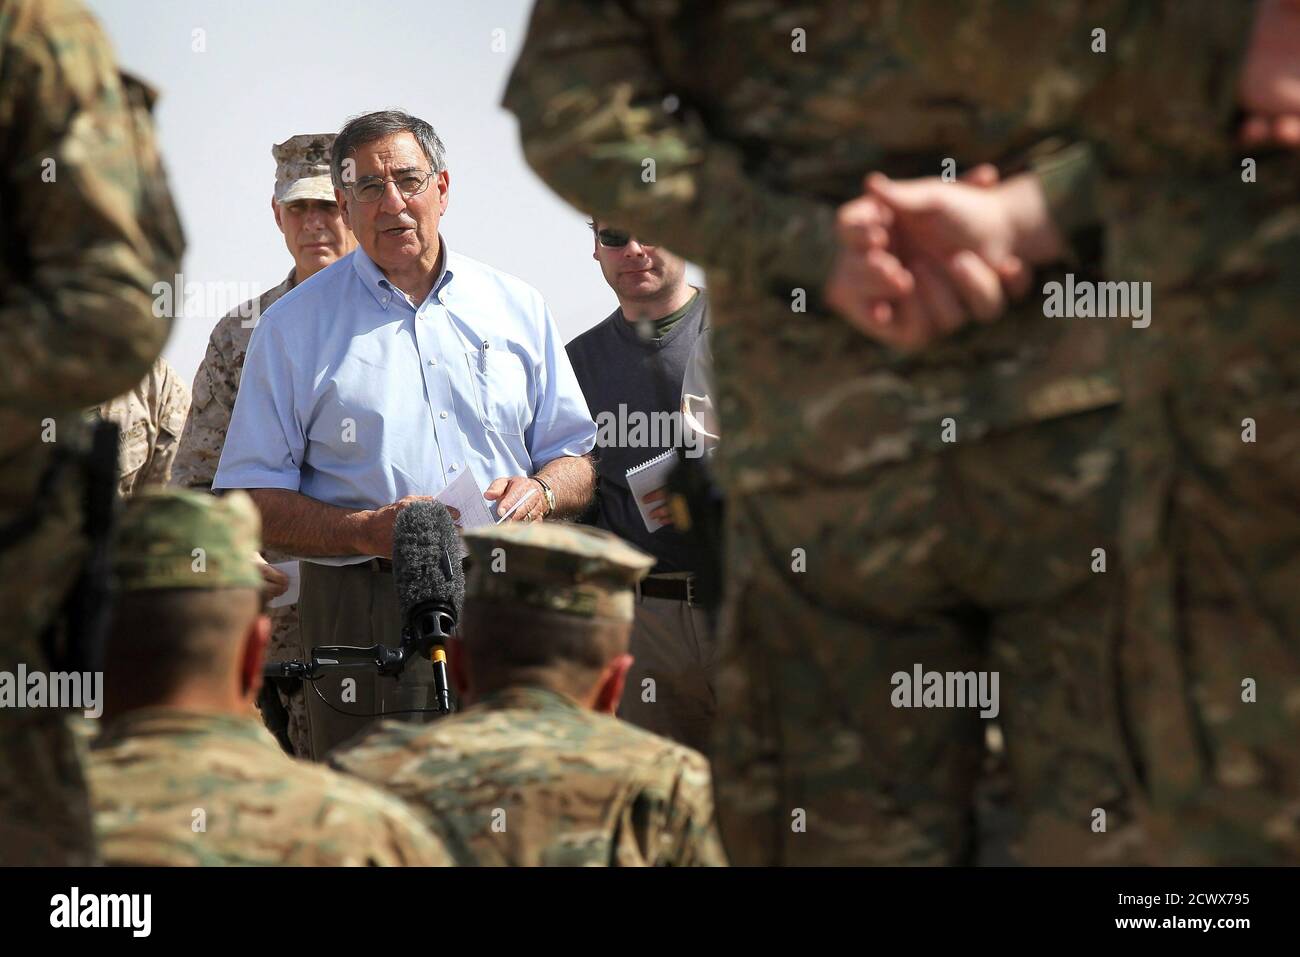 U.S. Defense Secretary Leon Panetta addresses troops from the 31st BN Light Infantry of the Georgian Army at Forward Operating Base Shukvani March 14, 2012. Panetta told troops in Afghanistan on Wednesday that the massacre of 16 Afghan civilians by an American soldier should not deter them from their mission to secure the country ahead of a 2014 NATO withdrawal deadline.  REUTERS/Scott Olson/Pool (AFGHANISTAN - Tags: MILITARY POLITICS) Stock Photo